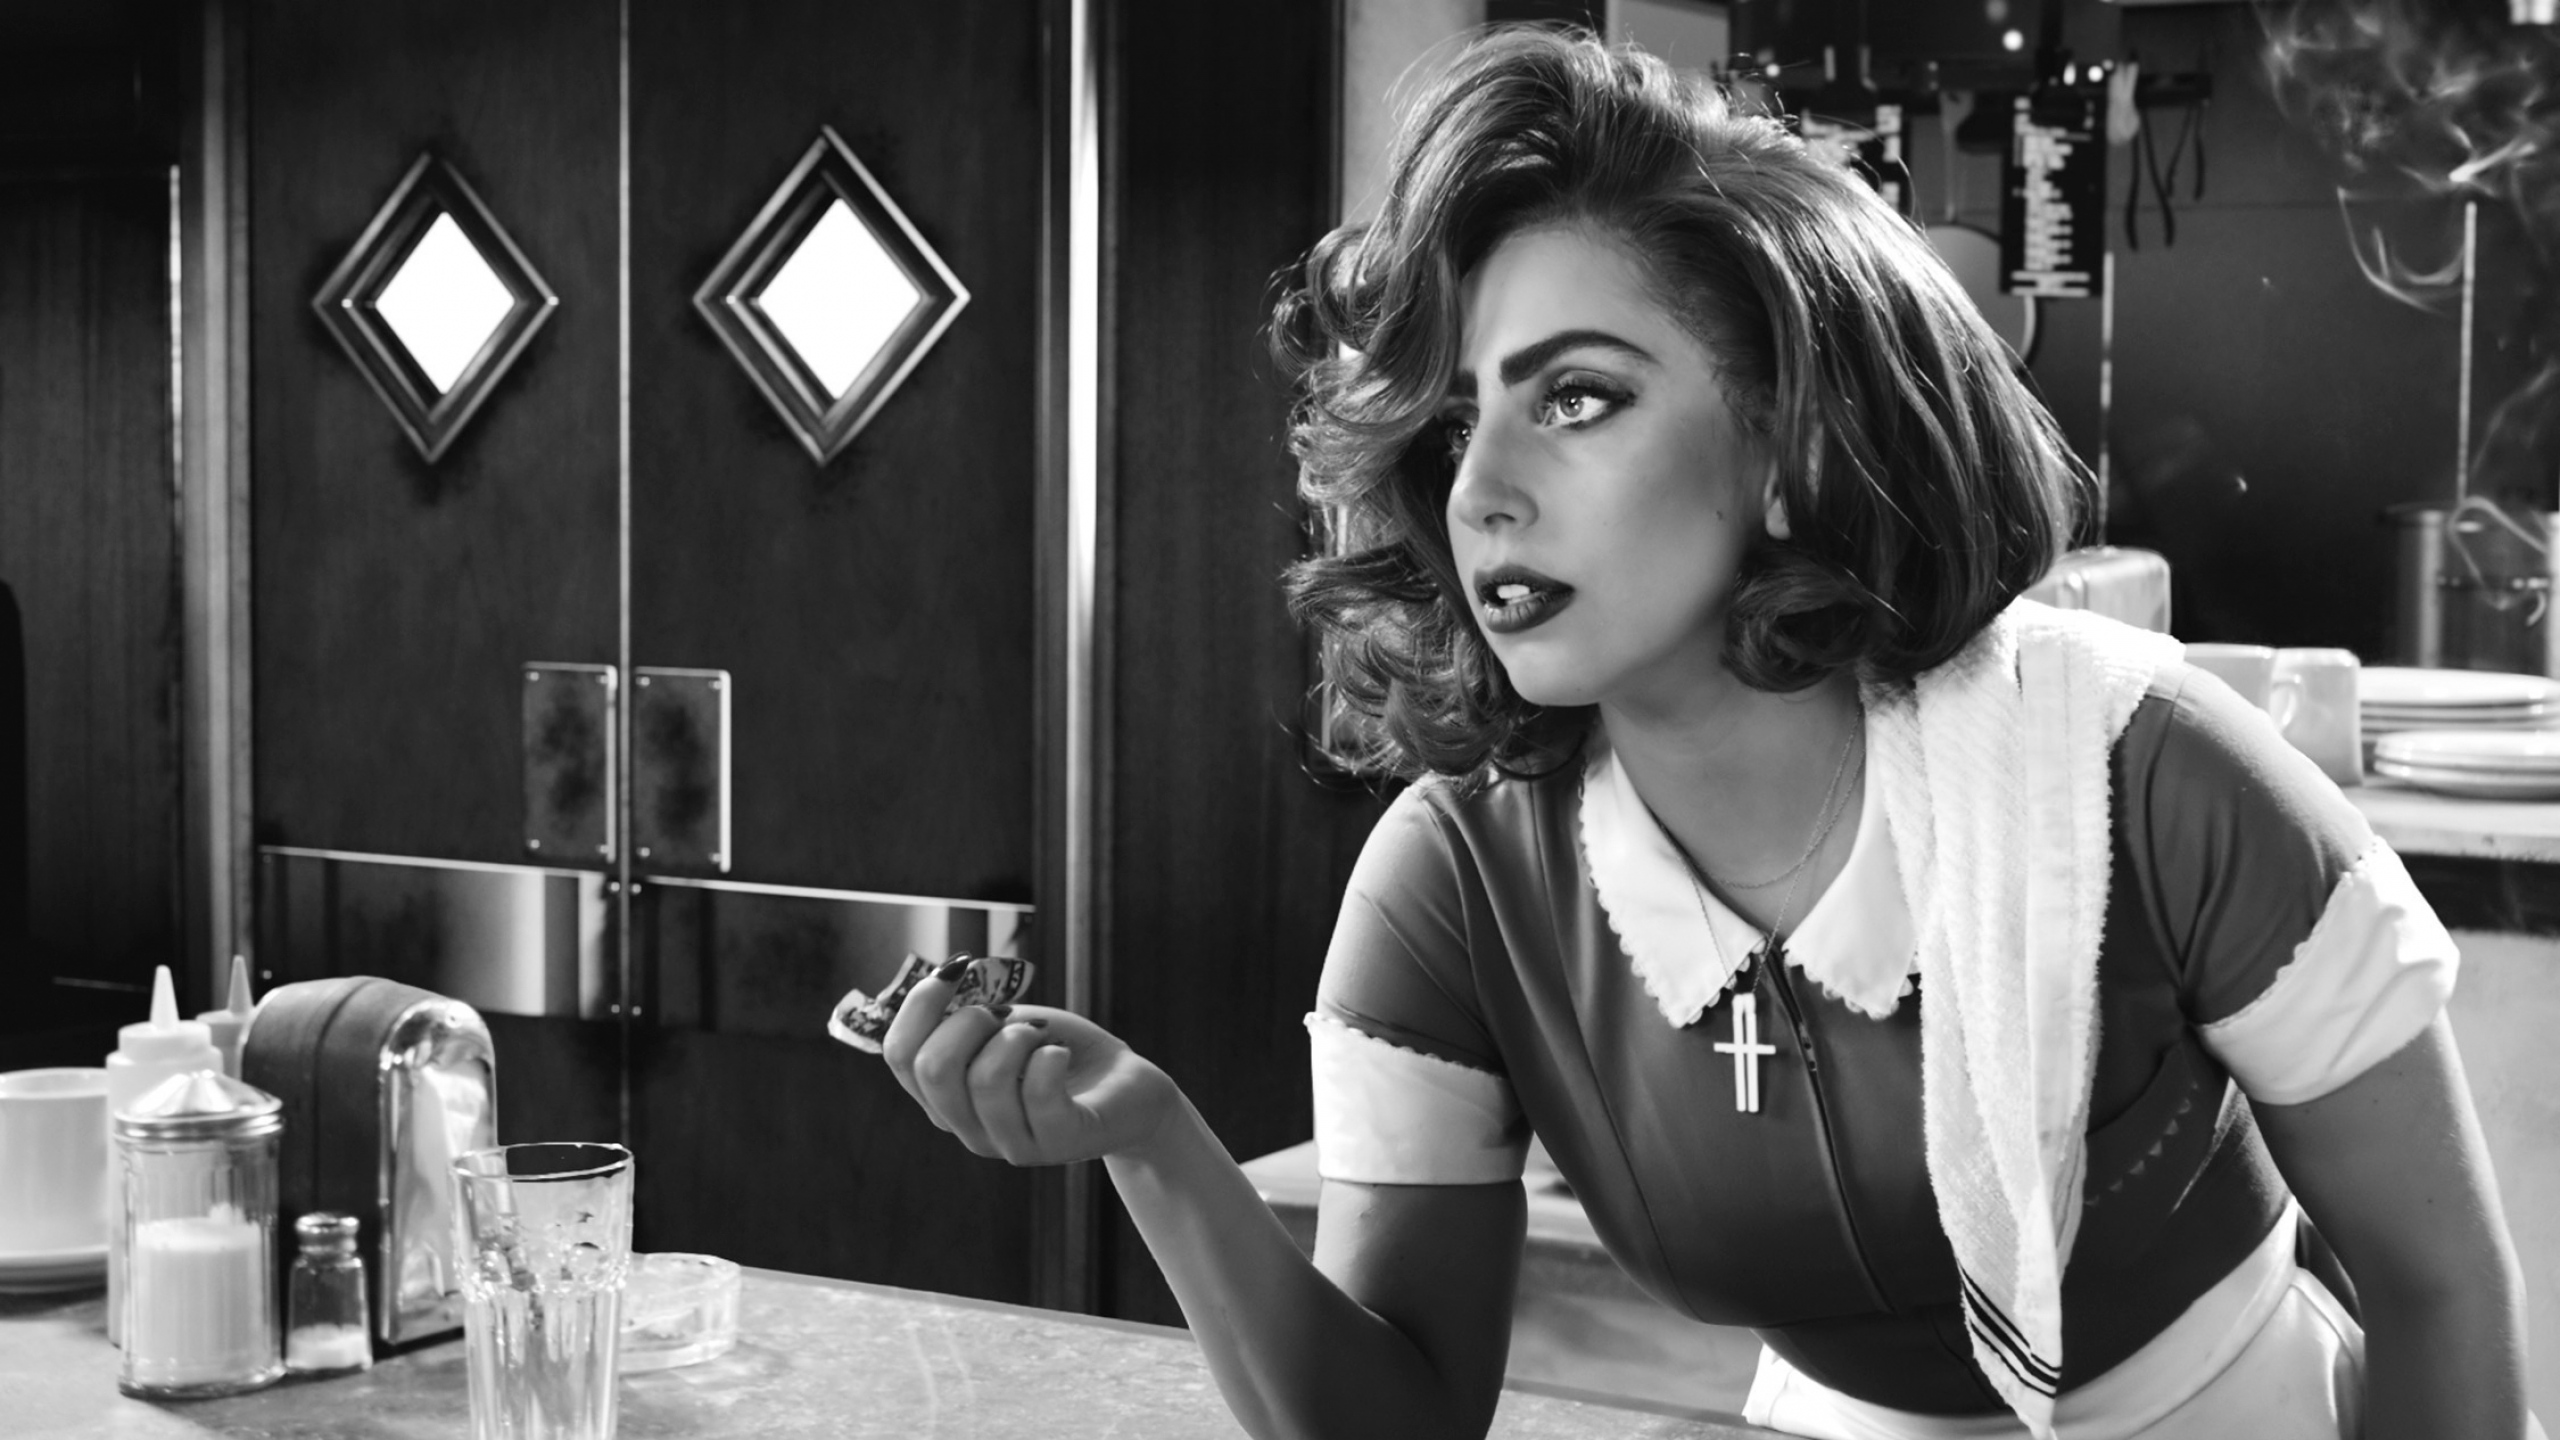 Download Wallpaper 2560x1440 Sin city a dame to kill for, Lady